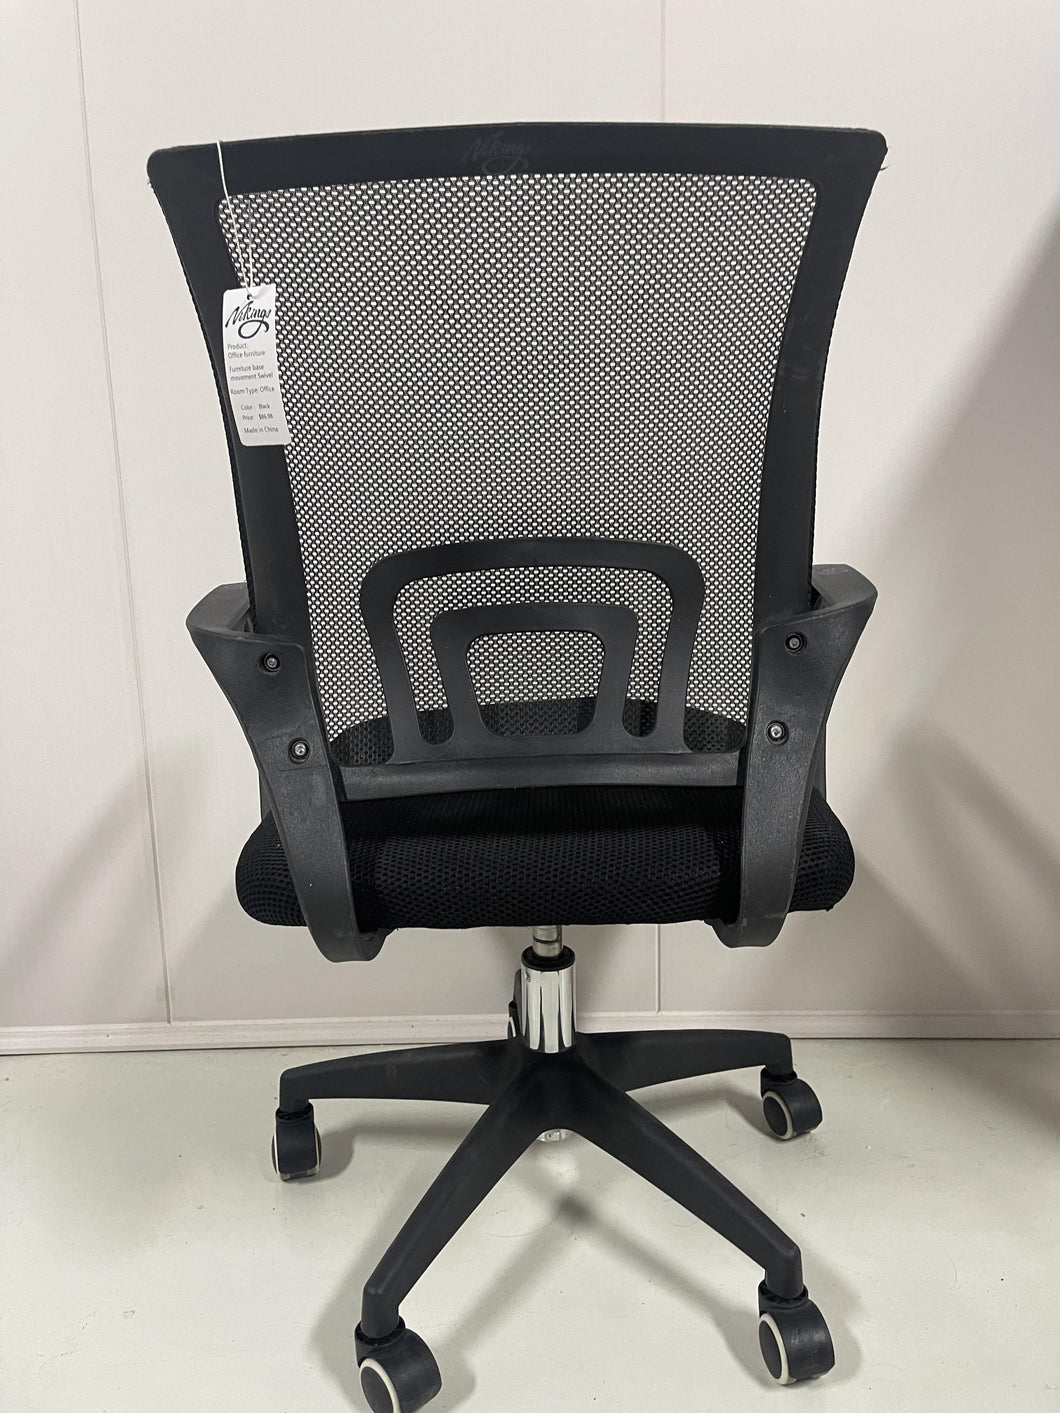 Nikings Office furniture,Ergonomic Mesh Office Chair, High Back Desk Chair with 3D Arms, Tilt Function, Lumbar Support and PU Wheels, Swivel Computer Task Chair with Armrests, Adjustable Height/Tilt, 360-Degree Swivel